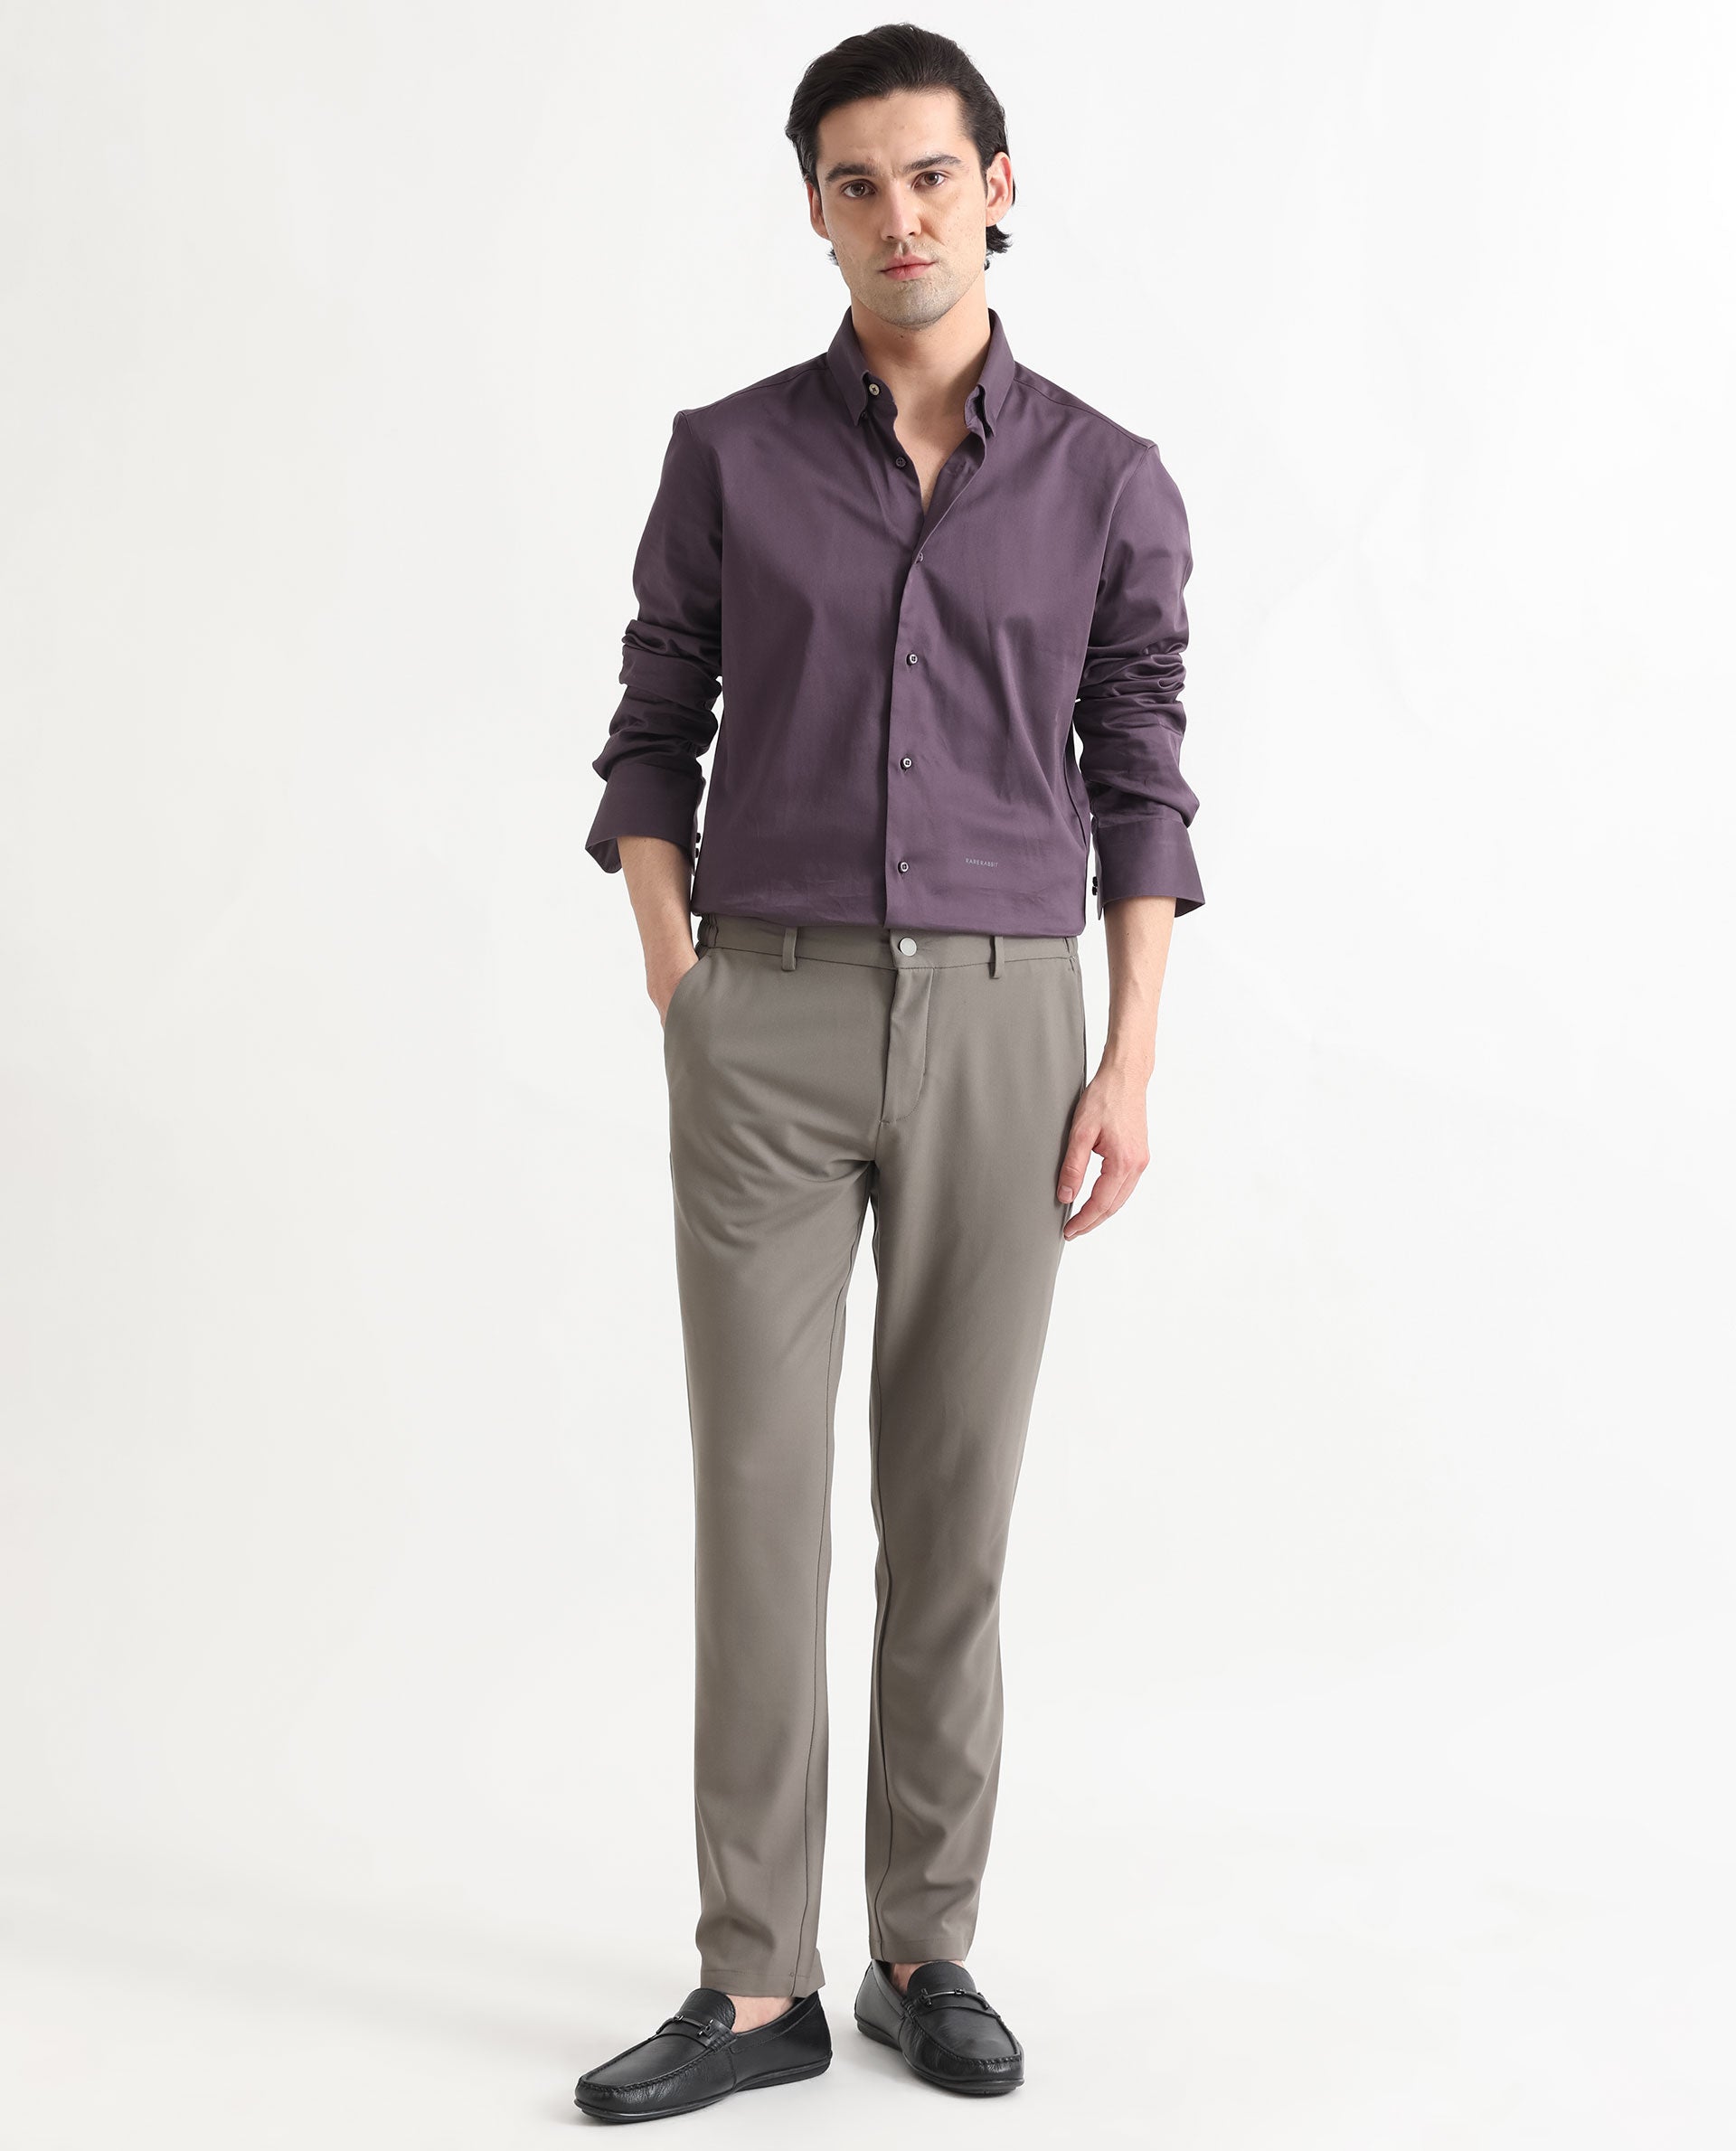 Gray-haired blue-eyed man with a short beard fascinator with short hair,  human, natural skin color in purple shirt to the elbows gold strings and  black pants and boots. stands in full growth